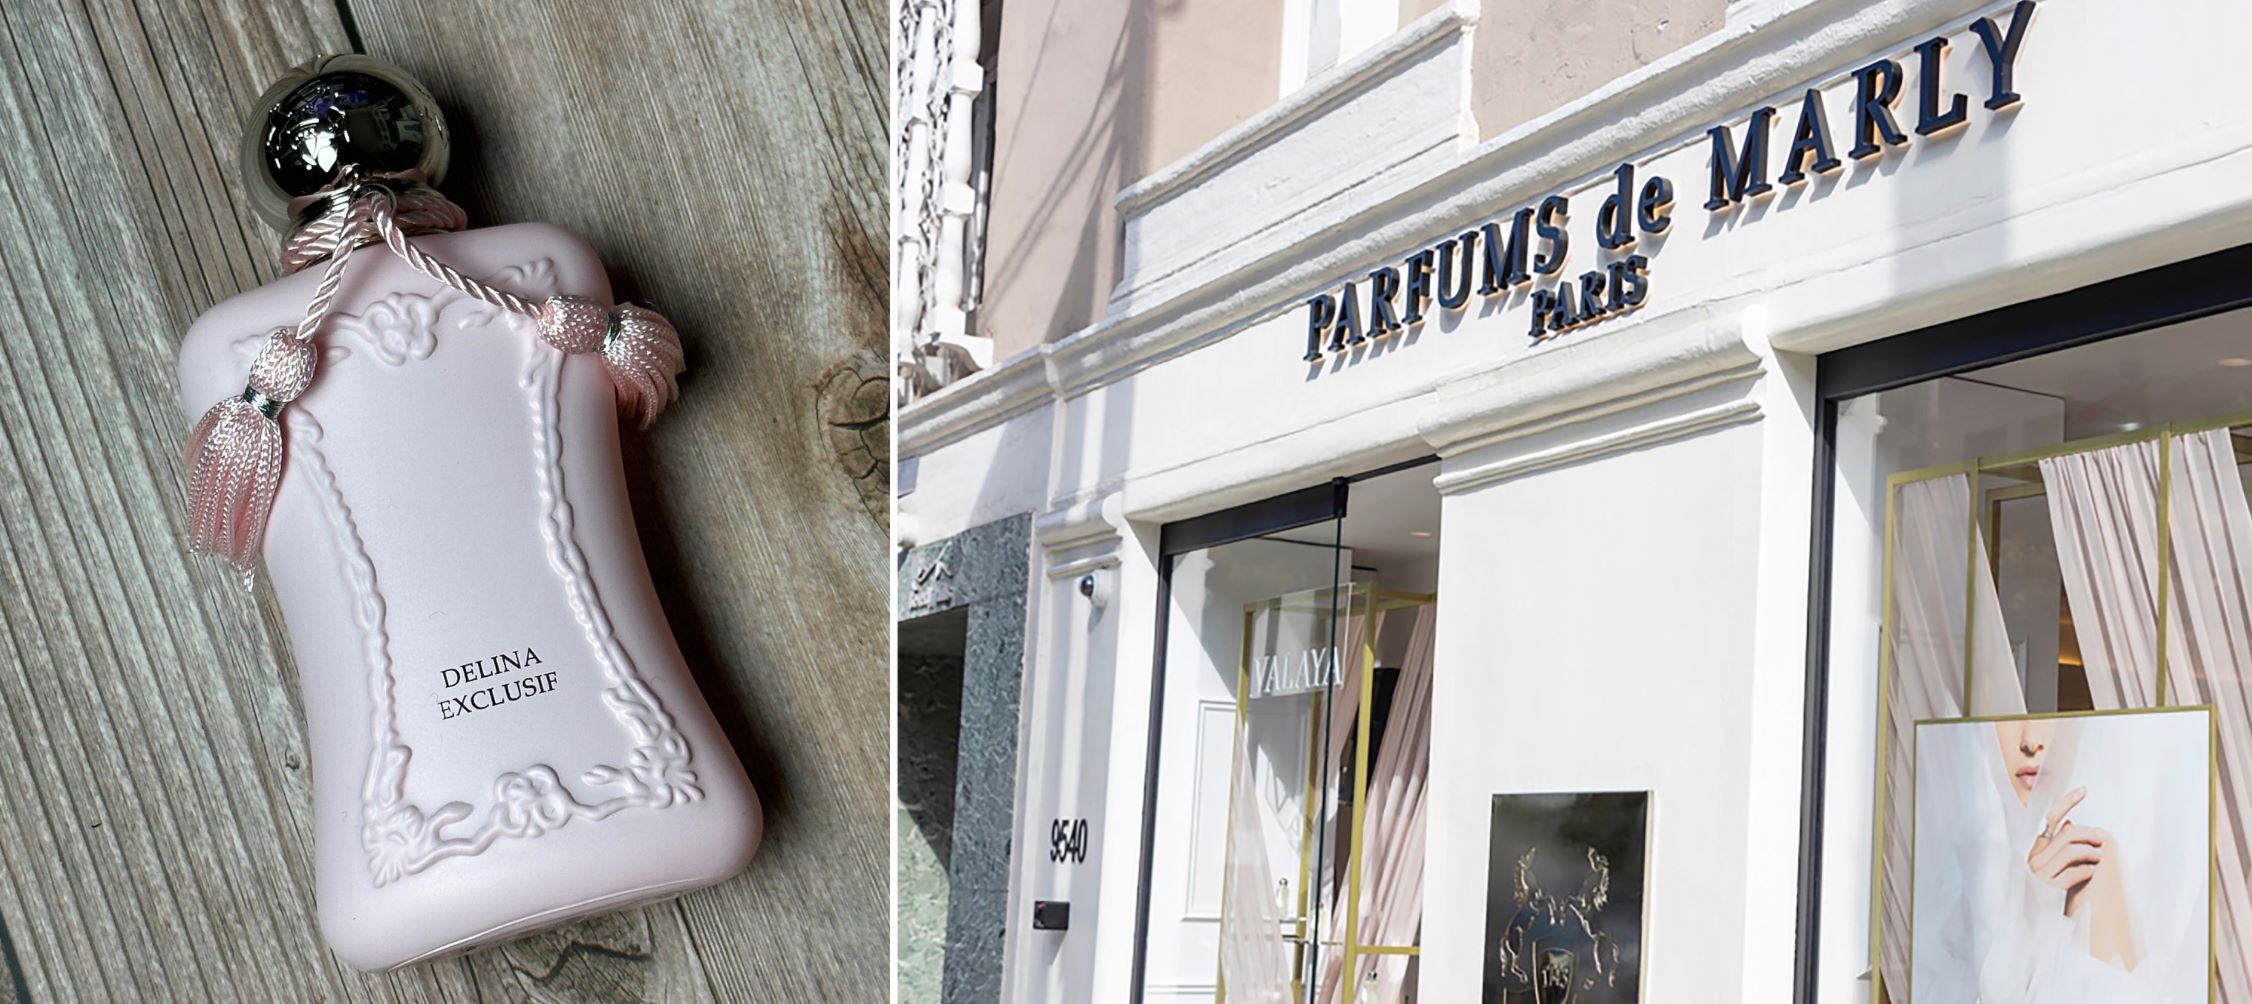 An image of two images: in the left is a bottle of he popular Delina Exclusif perfume from the left image of the store, Parfums de Marly.